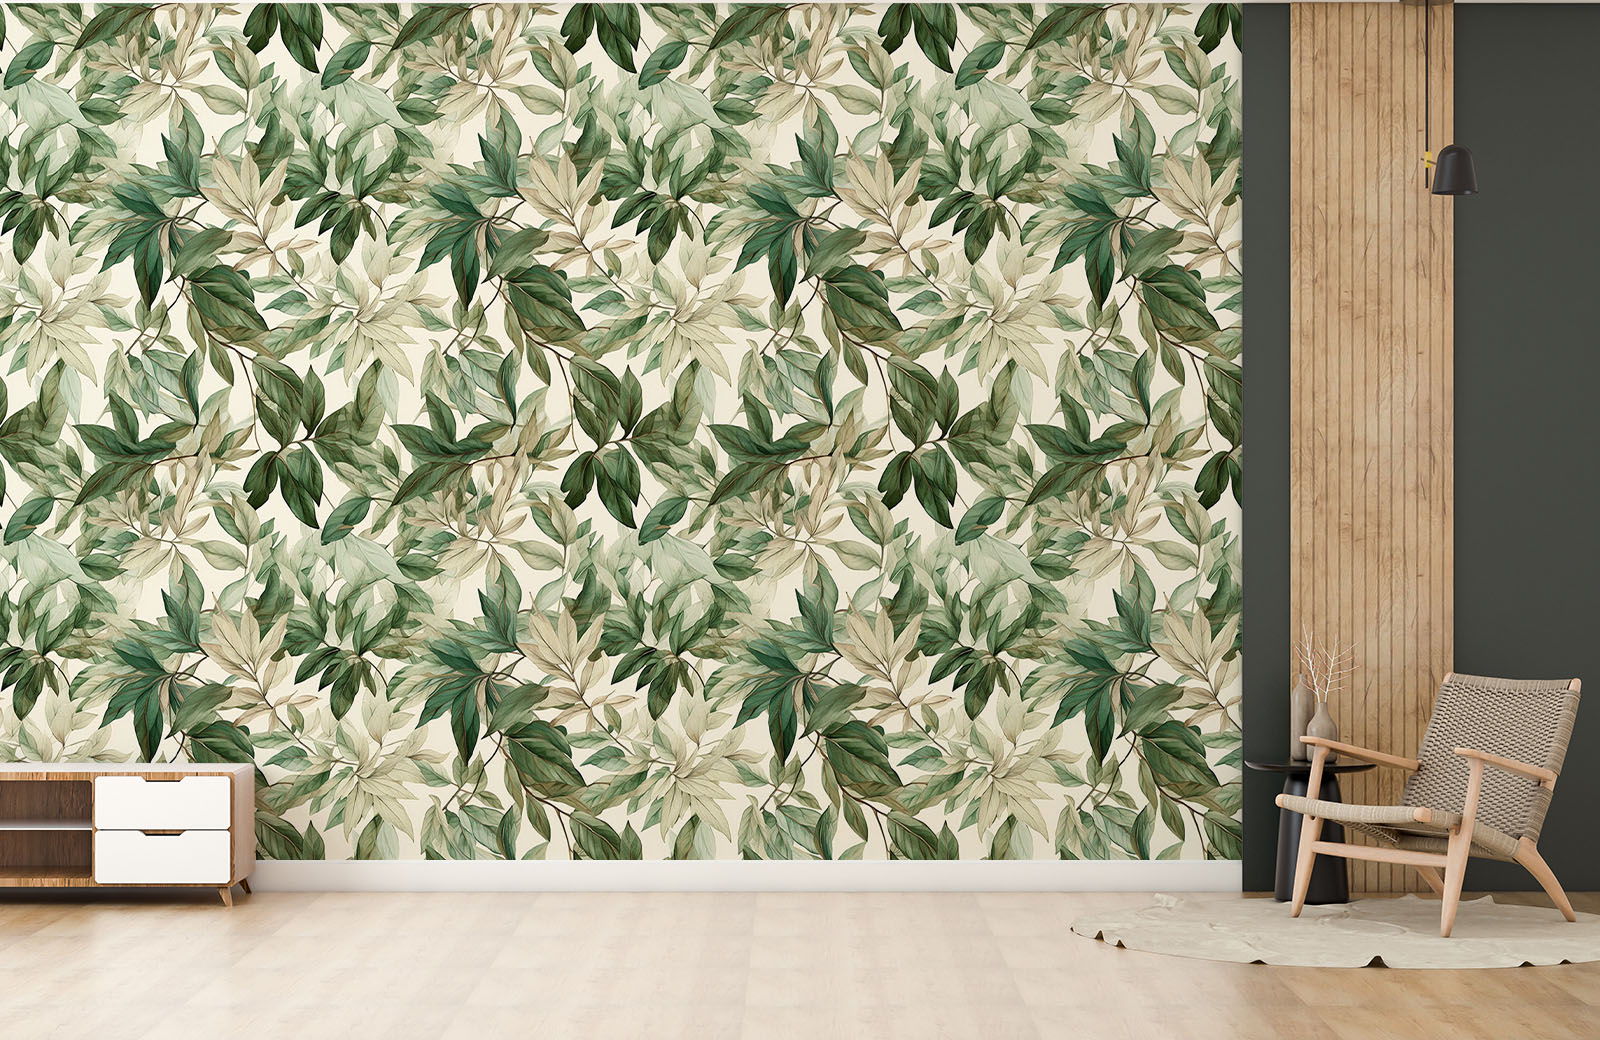 white-green-long-leaves-on-stem-wallpaper-with-chair